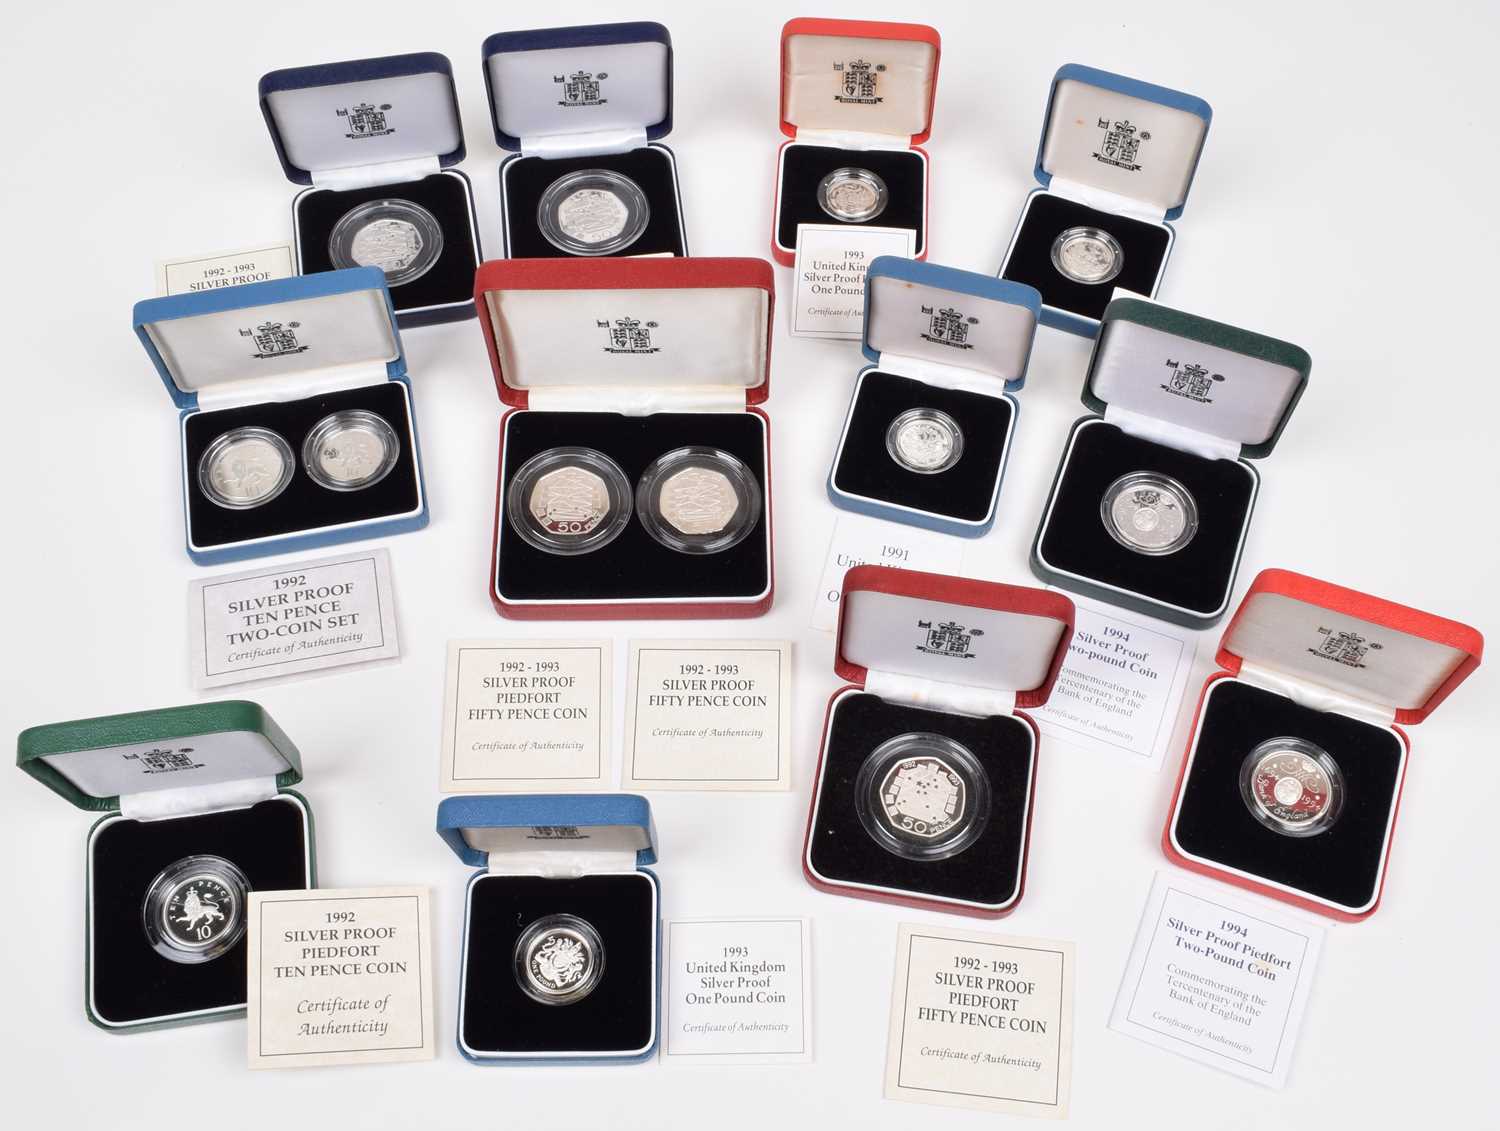 Lot 89 - Selection of United Kingdom Silver Proof Piedfort and Silver Proof Coins (12).